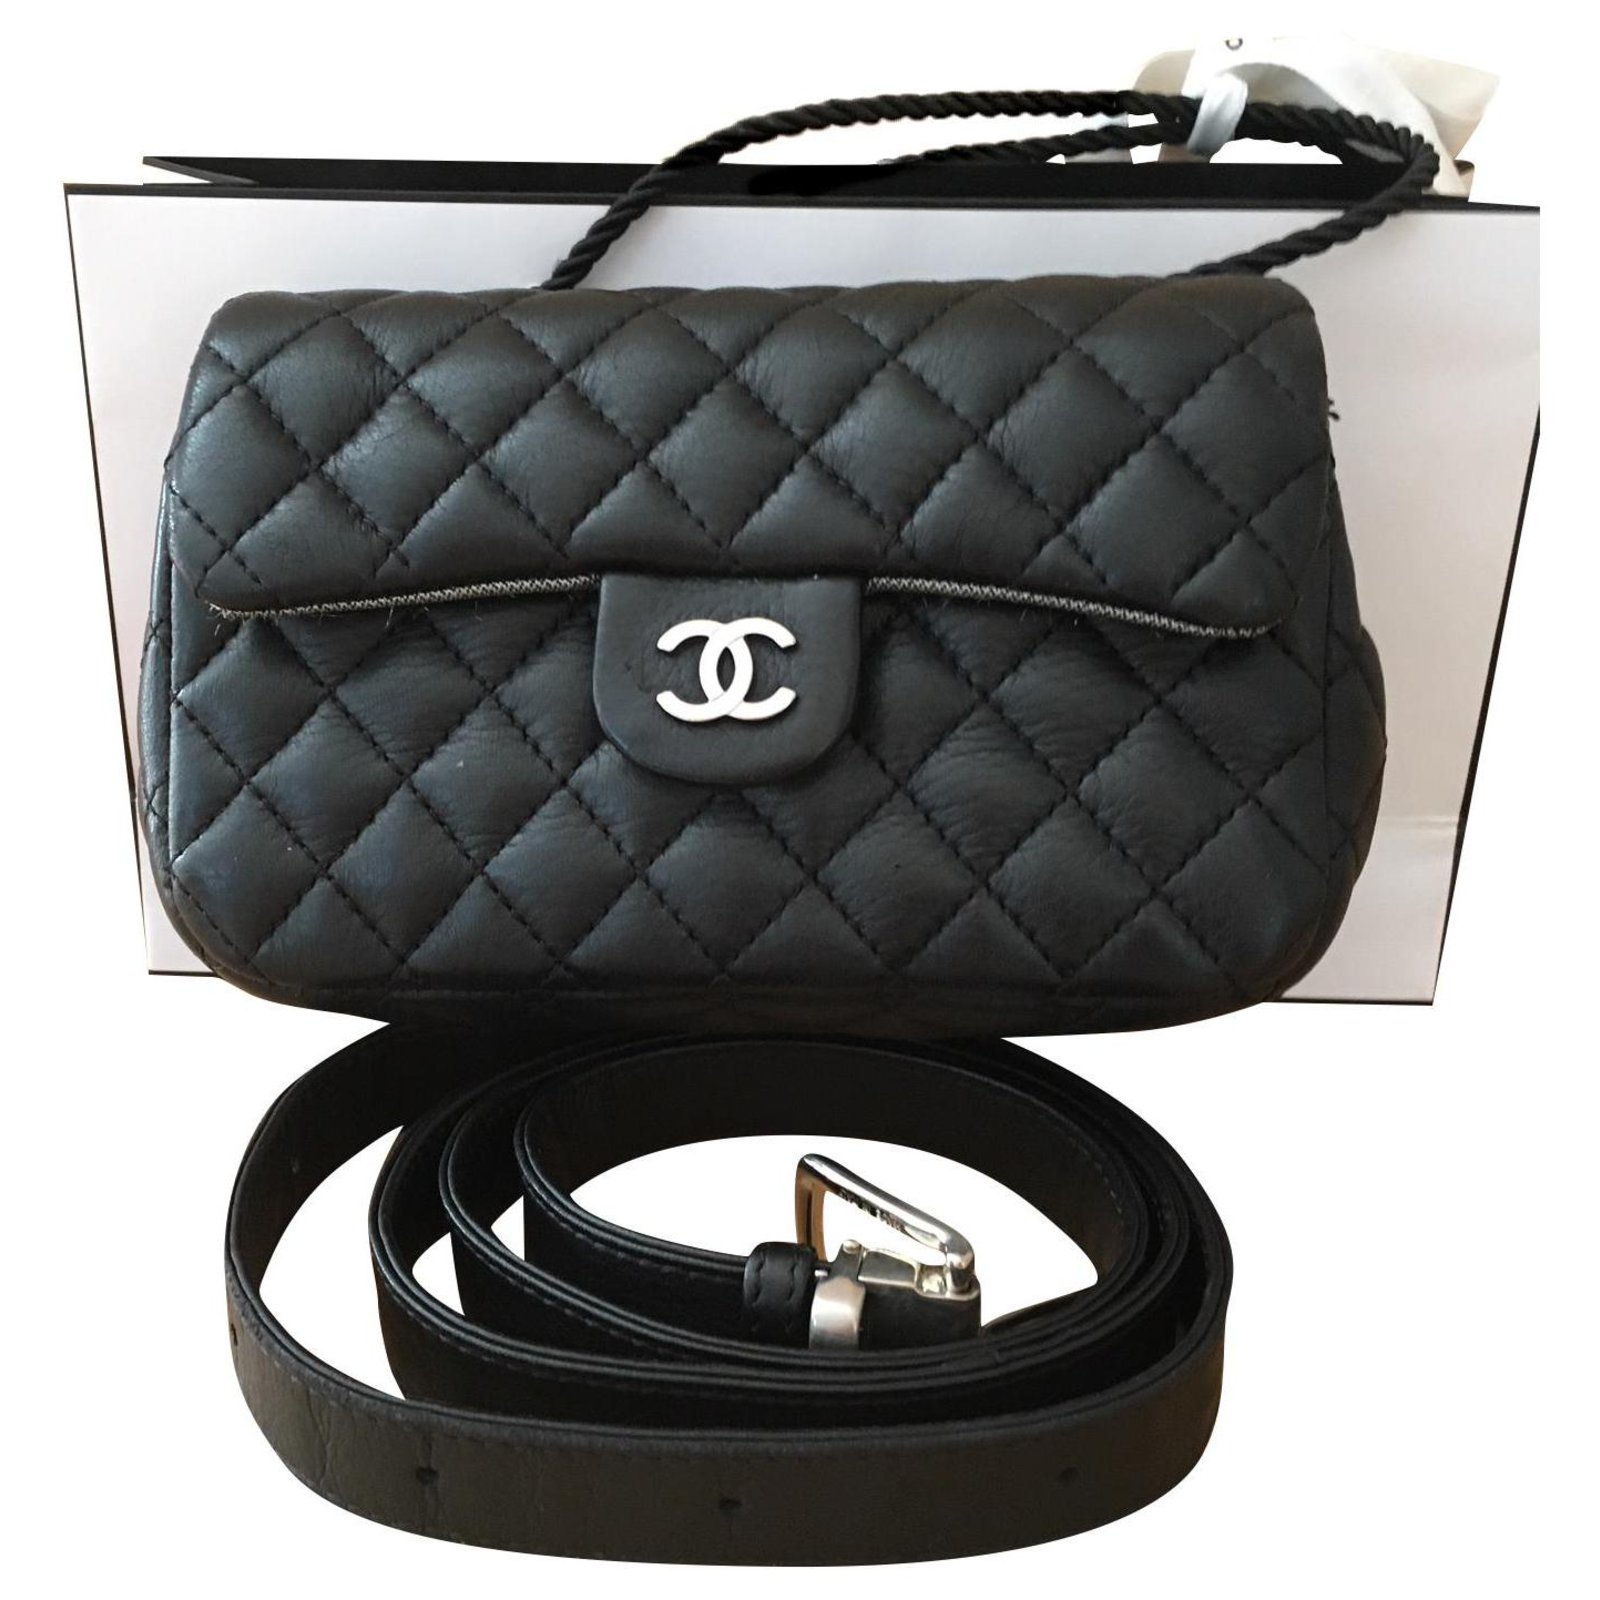 CHANEL VINTAGE QUILTED BEIGE LEATHER FLAP BELTBAG  Still in fashion